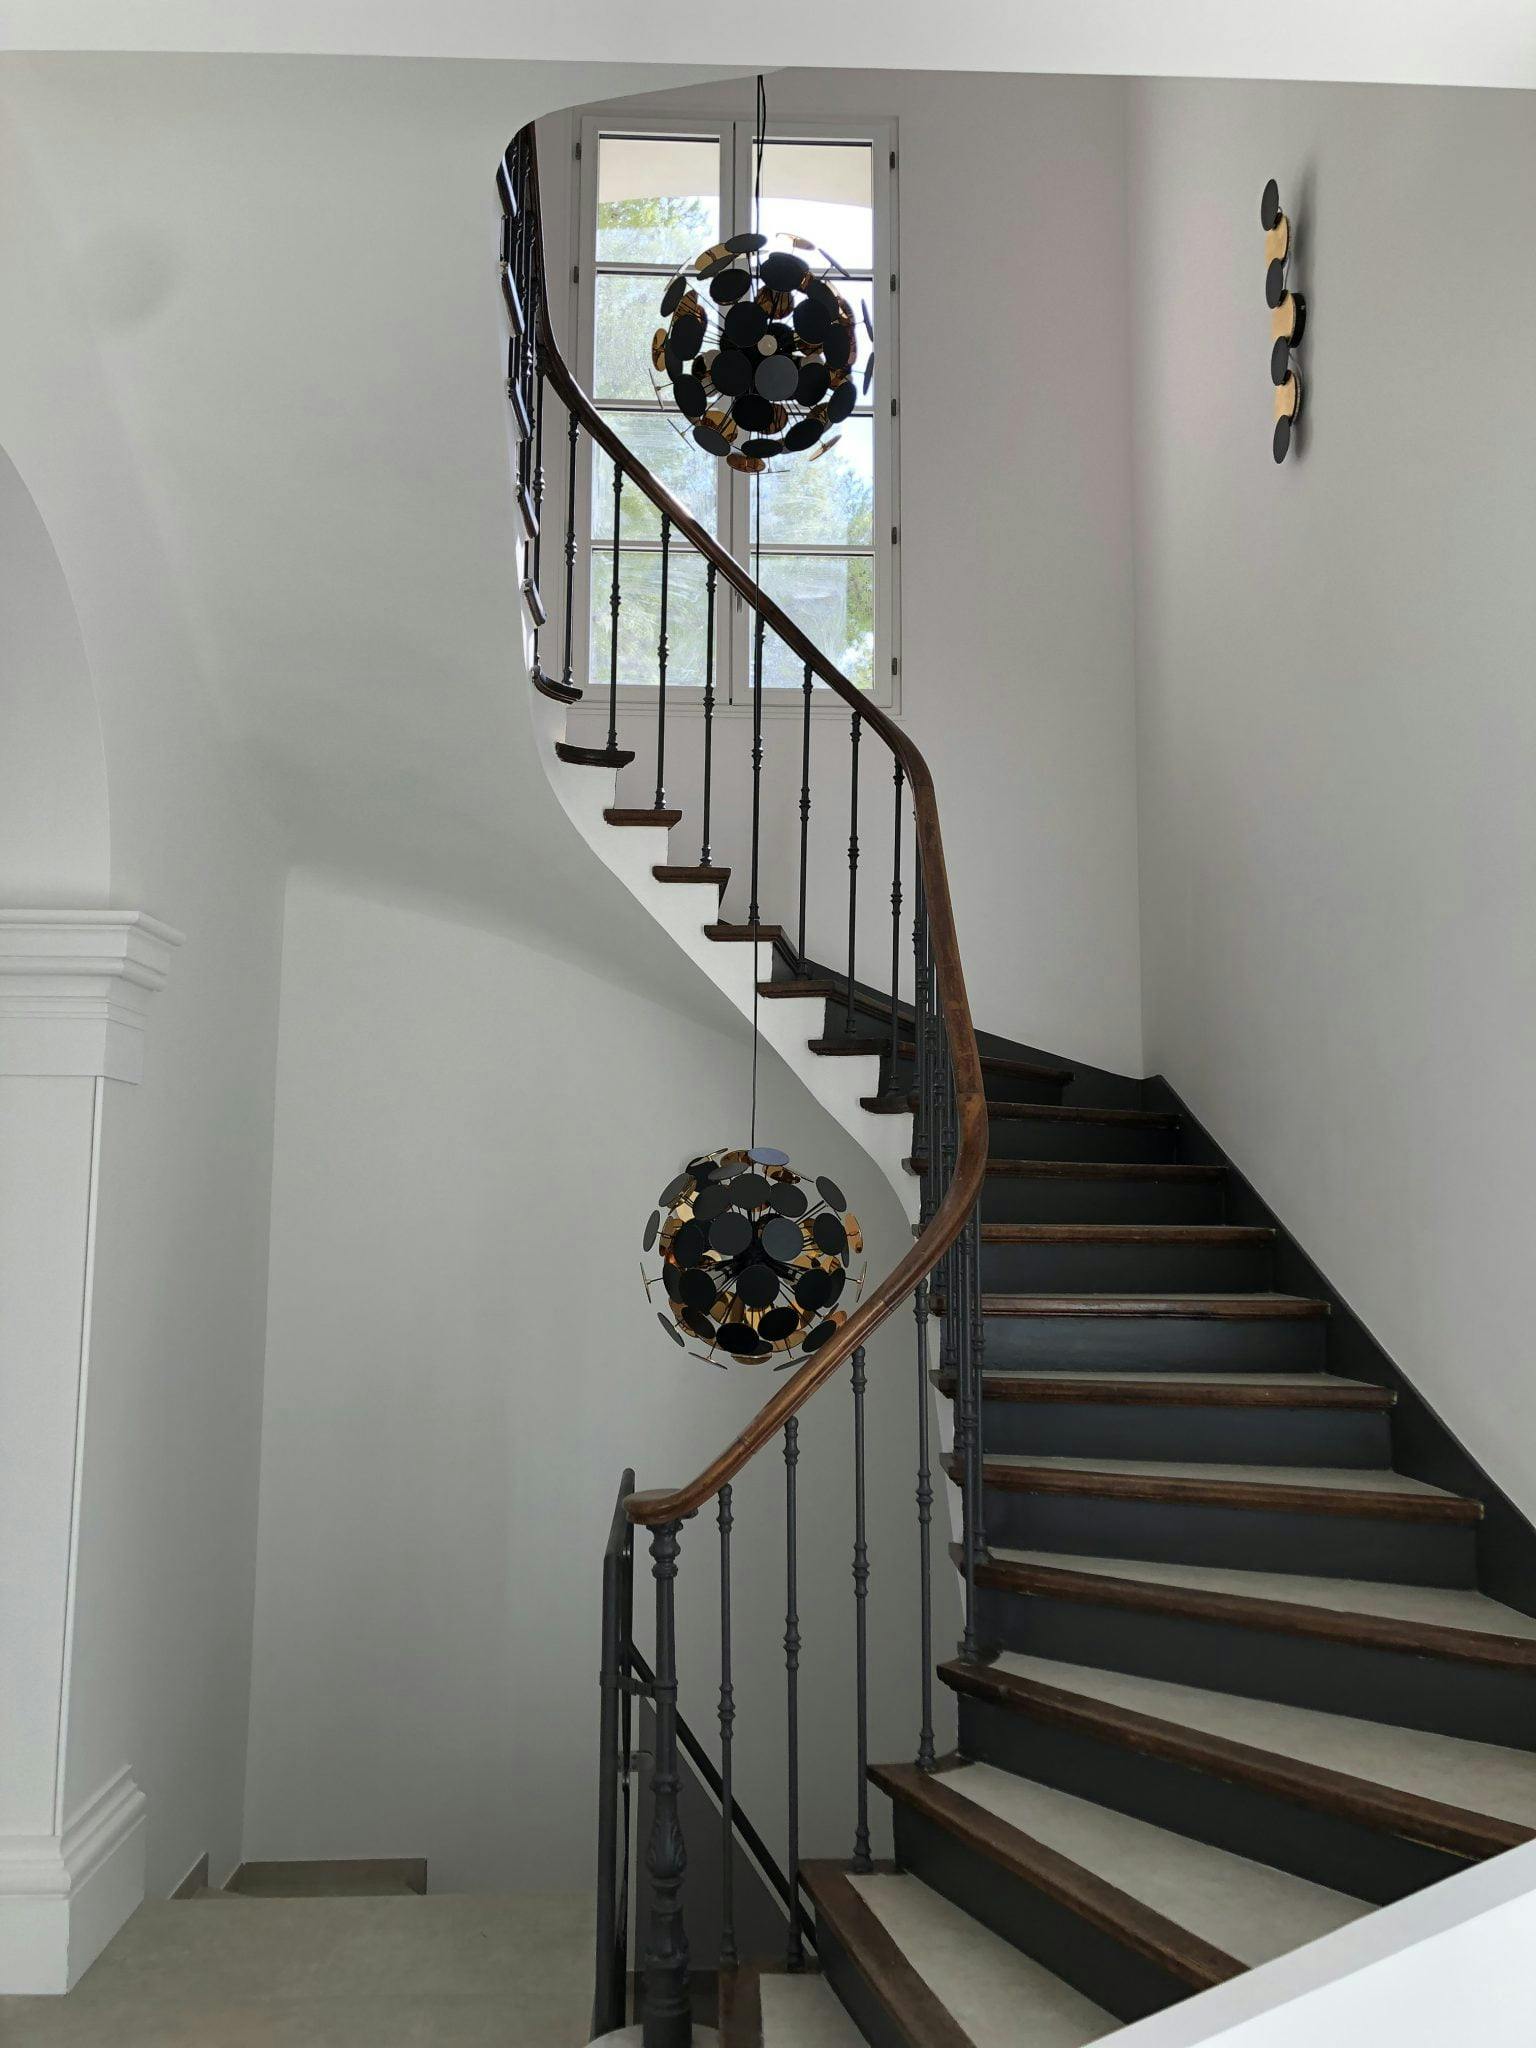 Spiral staircase to the first floor